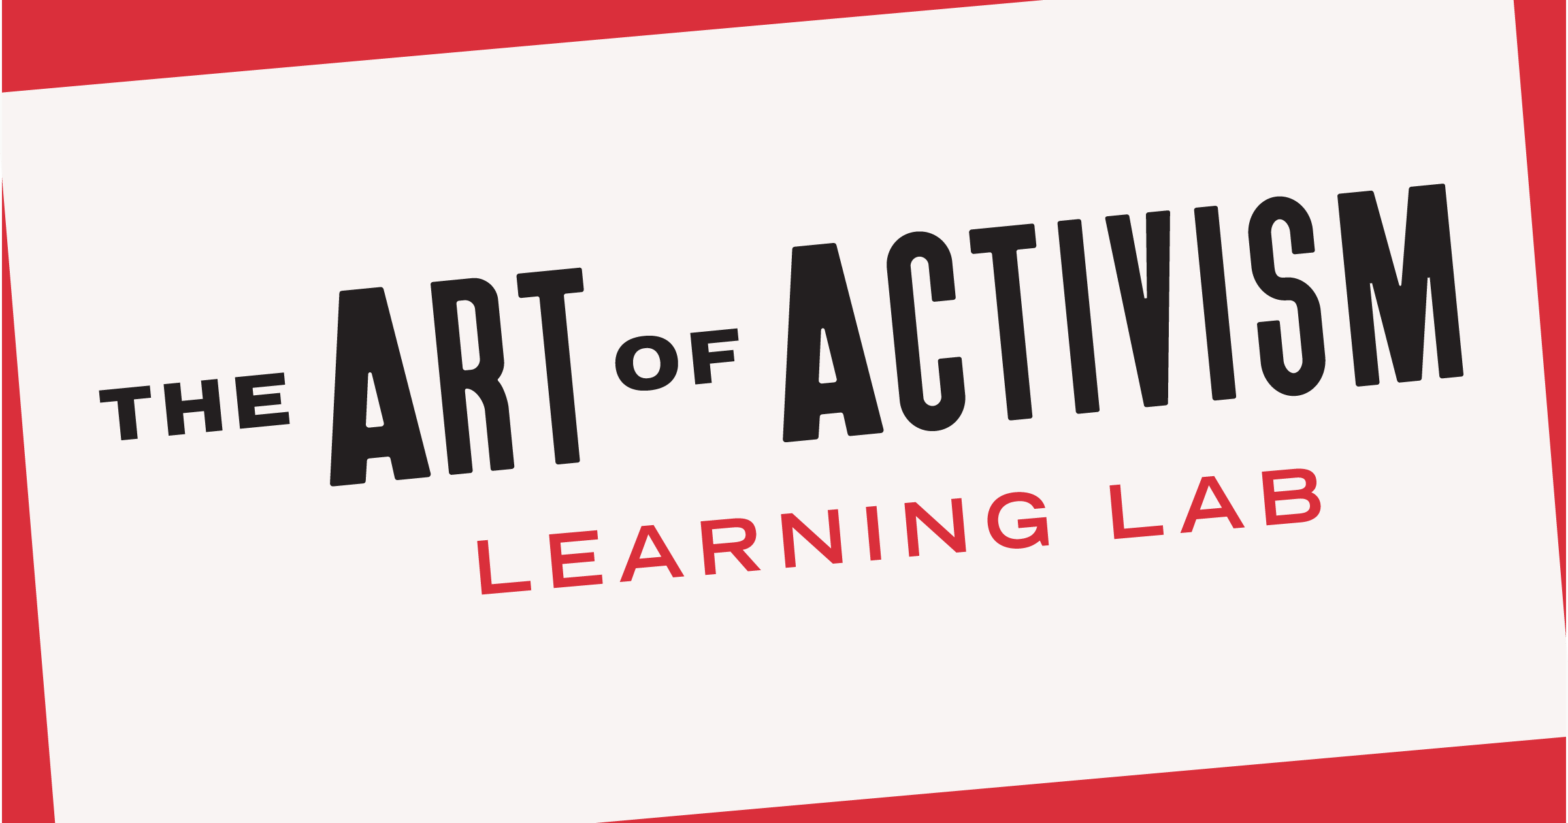 The Art of Activism Learning Lab